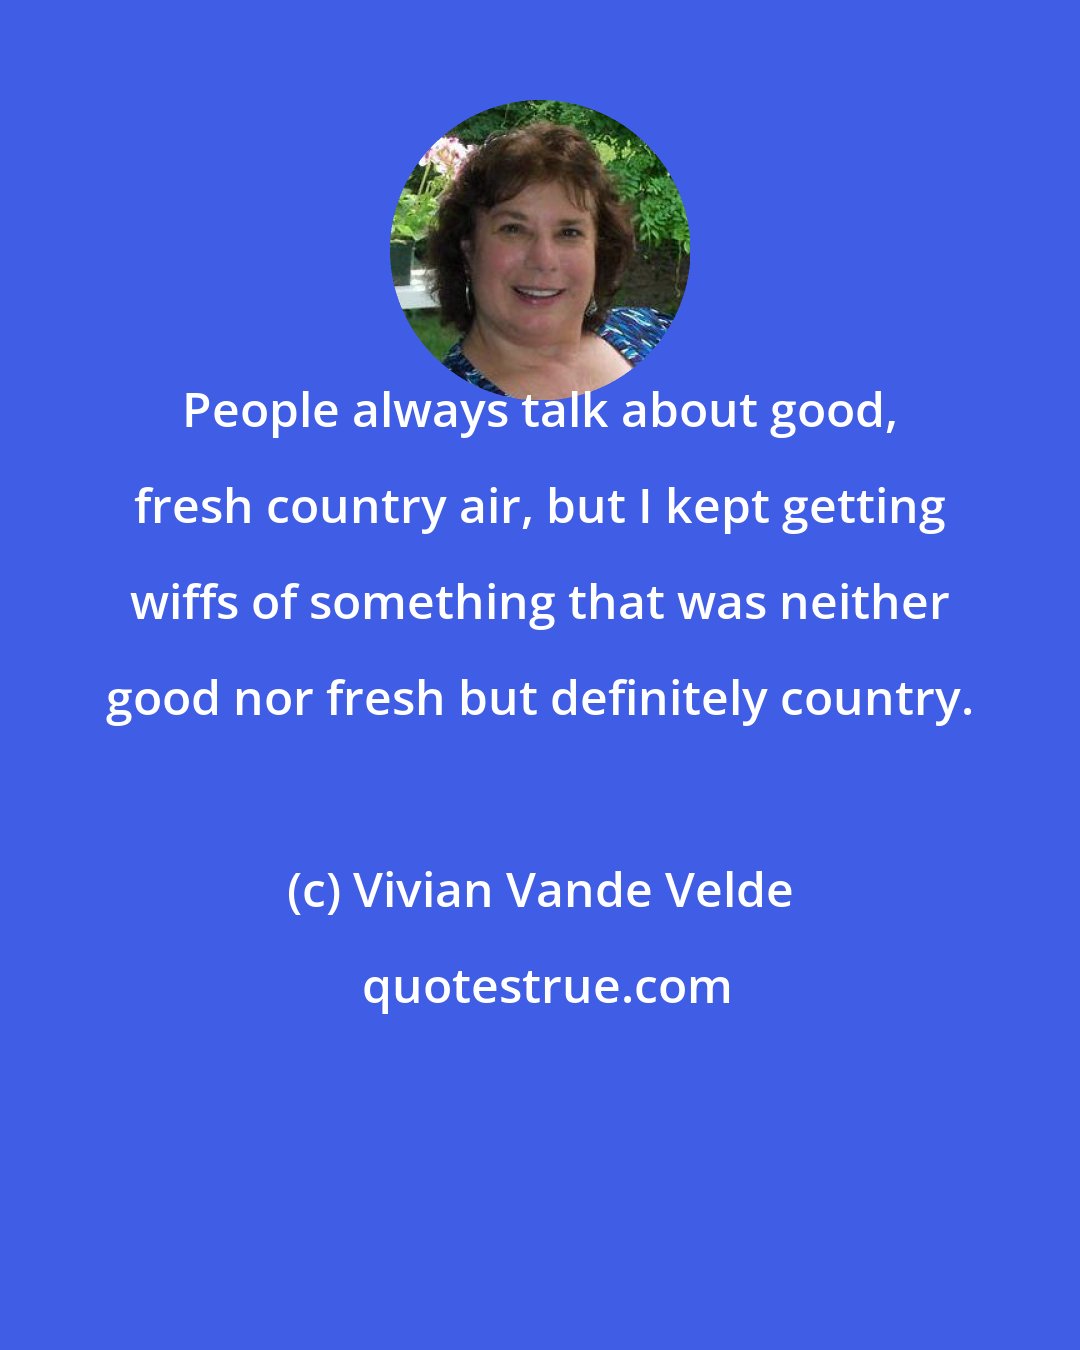 Vivian Vande Velde: People always talk about good, fresh country air, but I kept getting wiffs of something that was neither good nor fresh but definitely country.